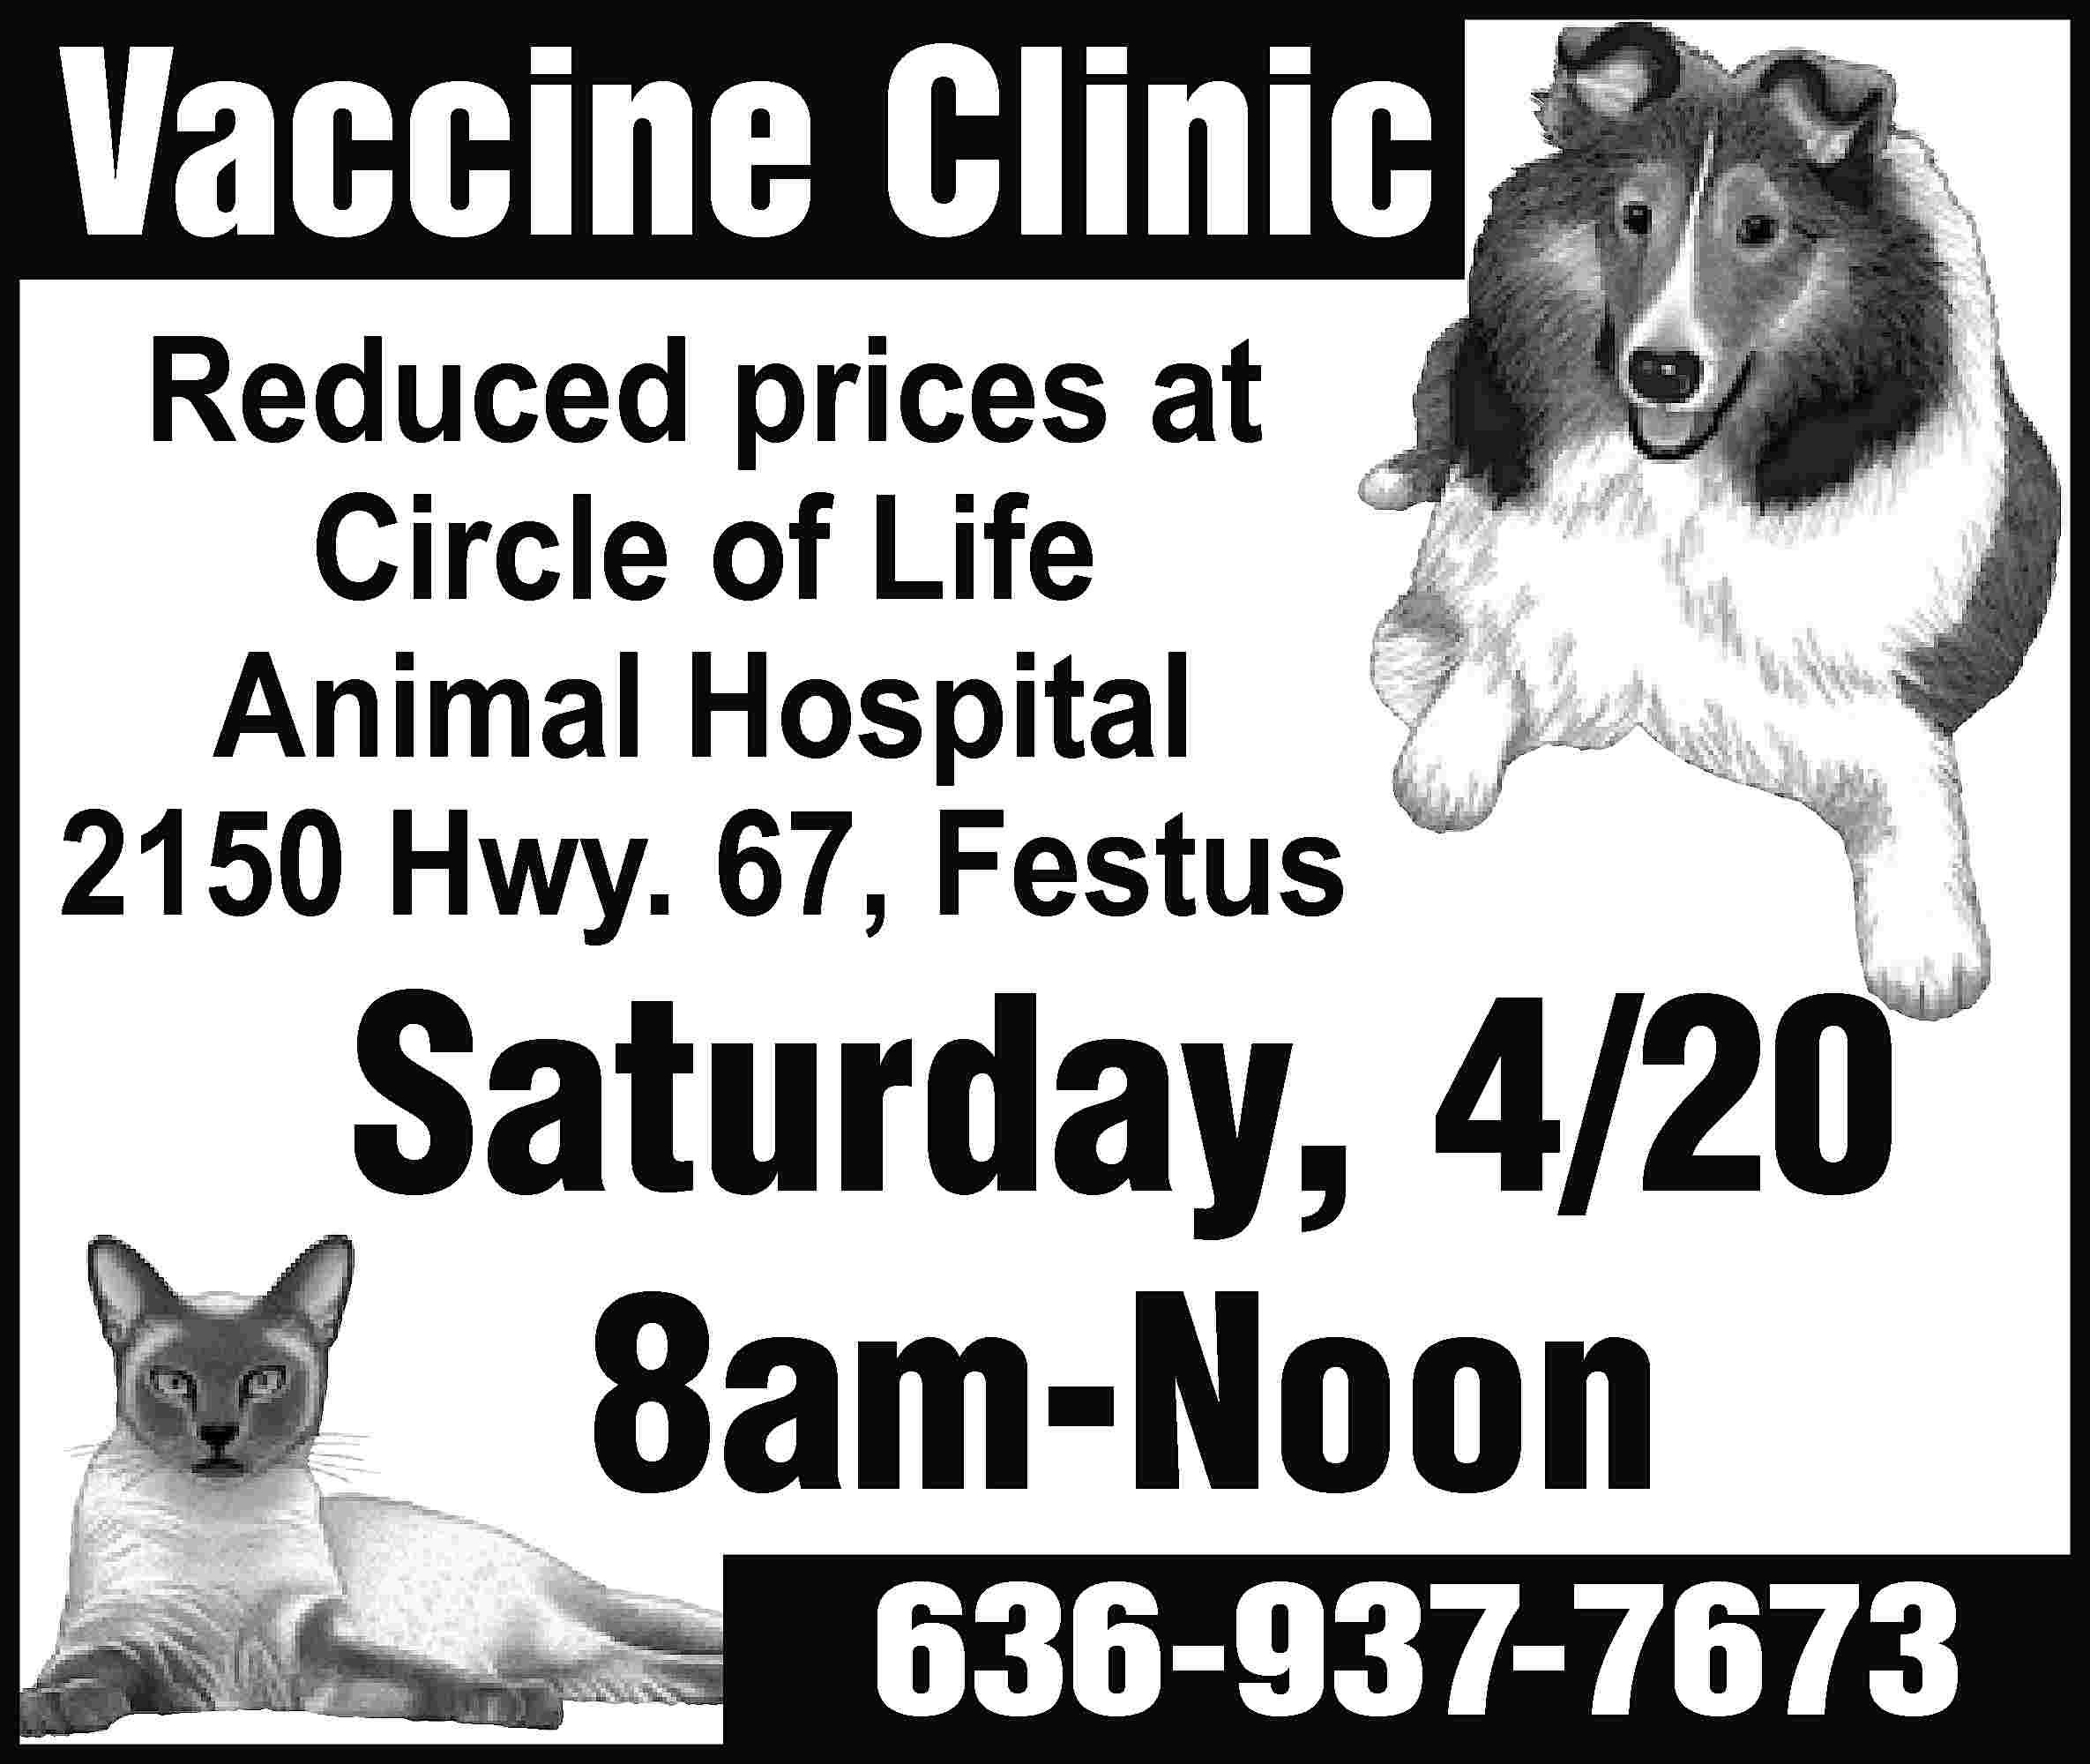 Vaccine Clinic Reduced prices at  Vaccine Clinic Reduced prices at Circle of Life Animal Hospital 2150 Hwy. 67, Festus Saturday, 4/20 8am-Noon 636-937-7673